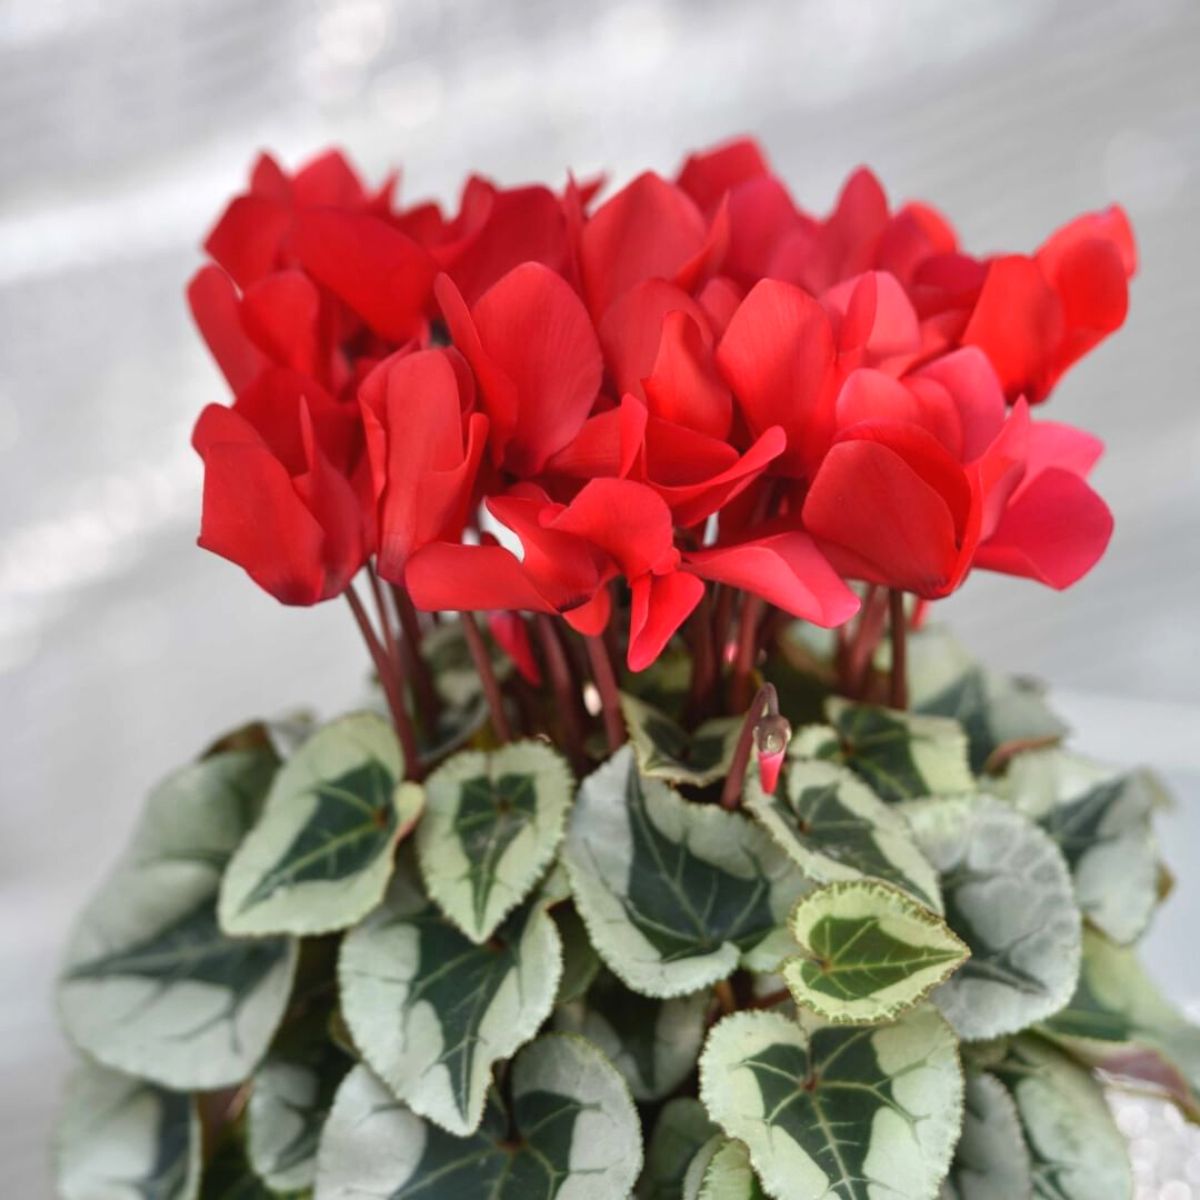 Red cyclamen flowers for the holidays